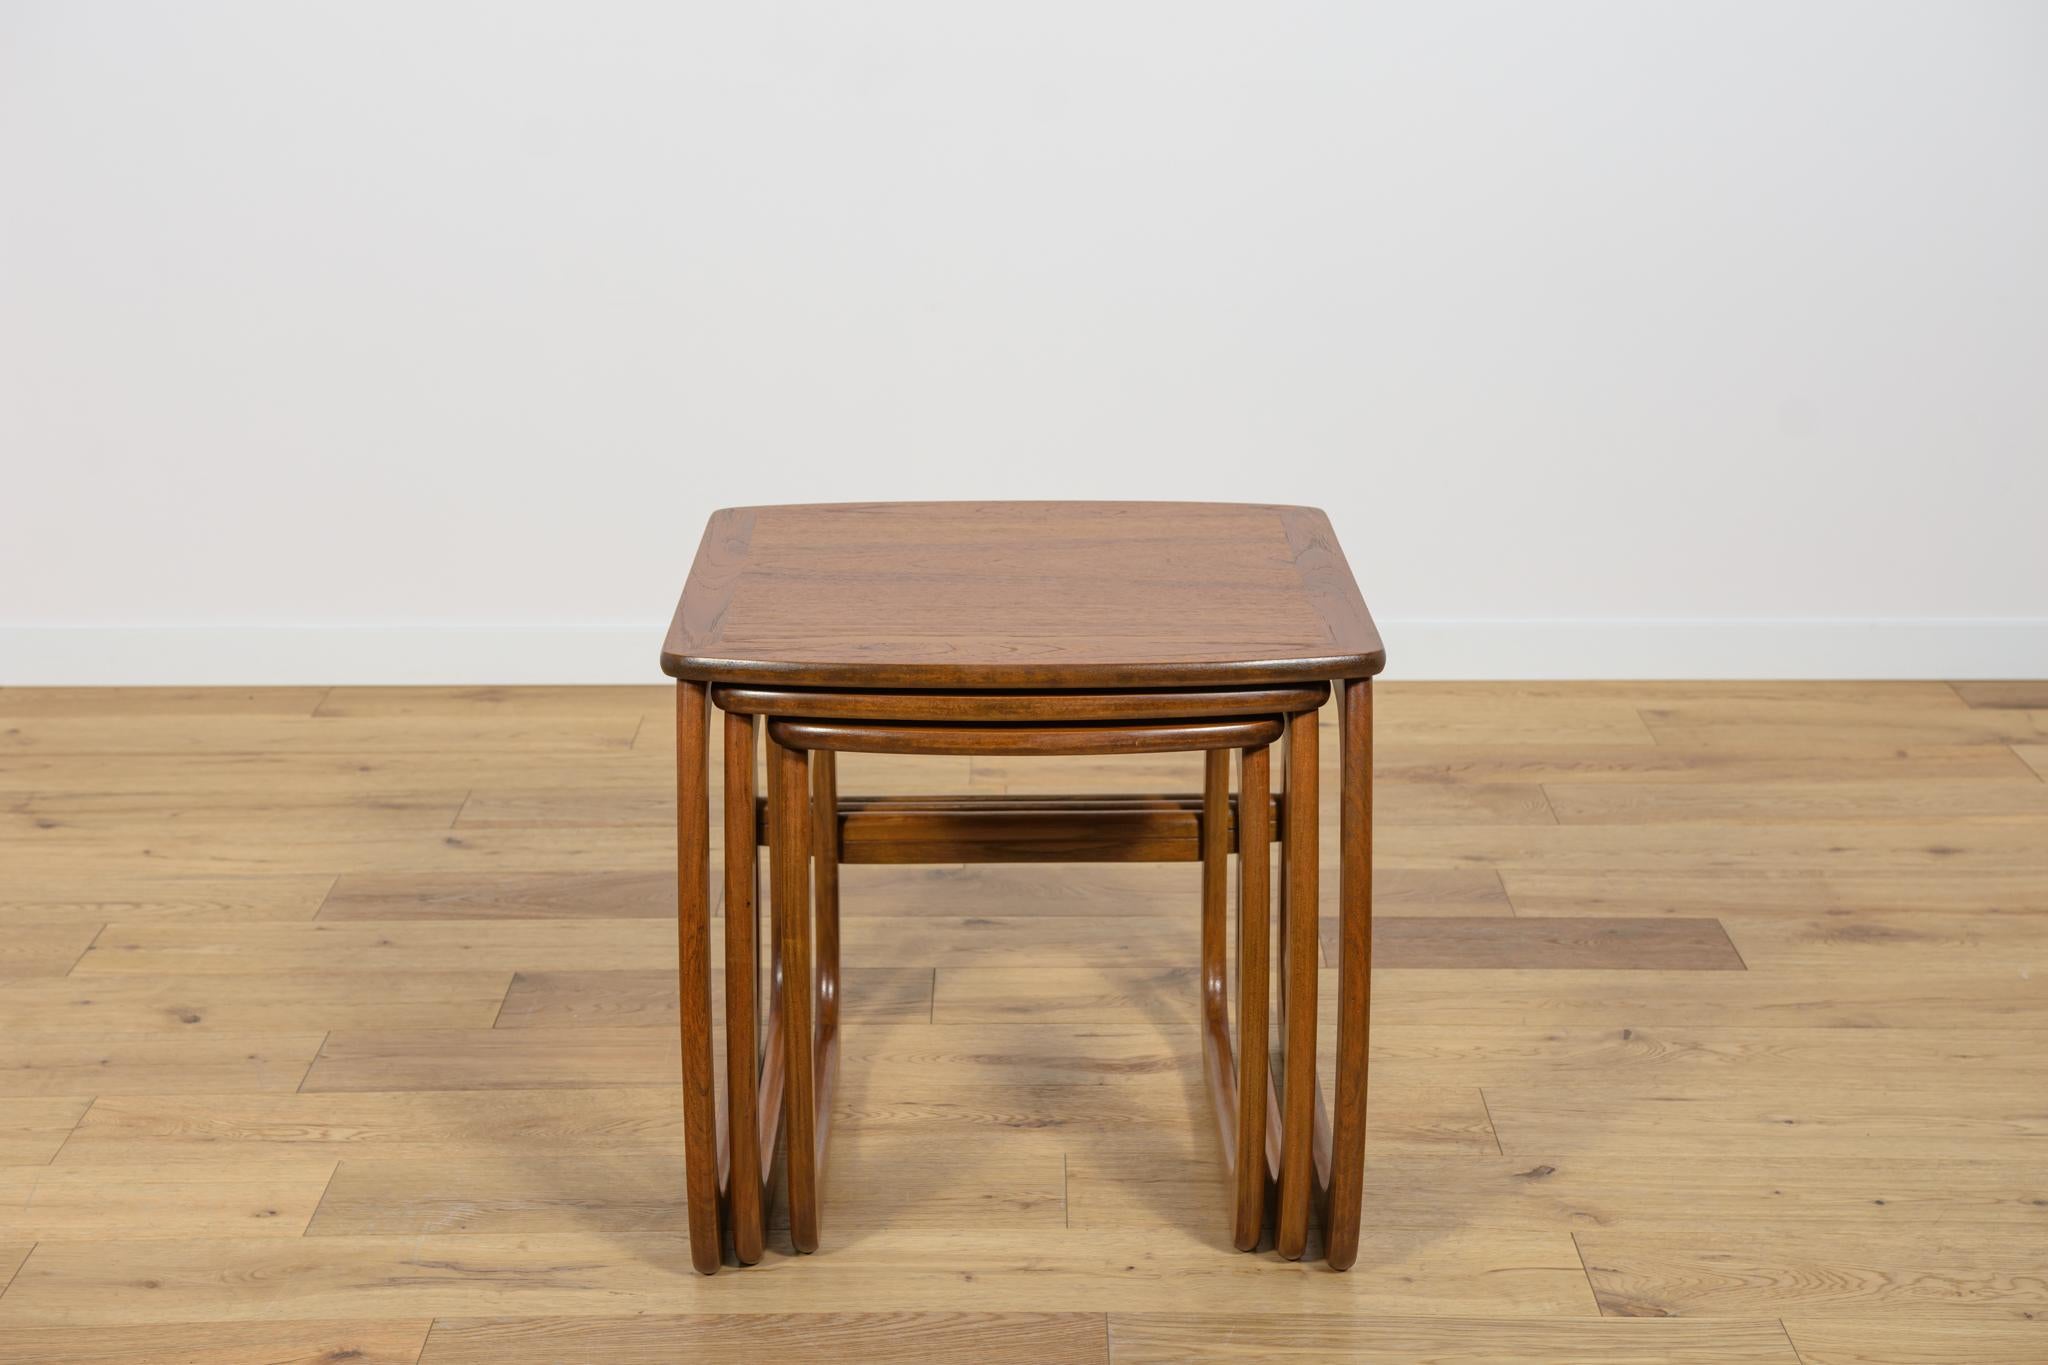 A set of three teak coffee tables manufactured in the 1960s in Great Britain. The tables have interesting geometric shapes. The whole thing has been completely renovated, the wood has been cleaned of the old surface, stained with an oak-colored